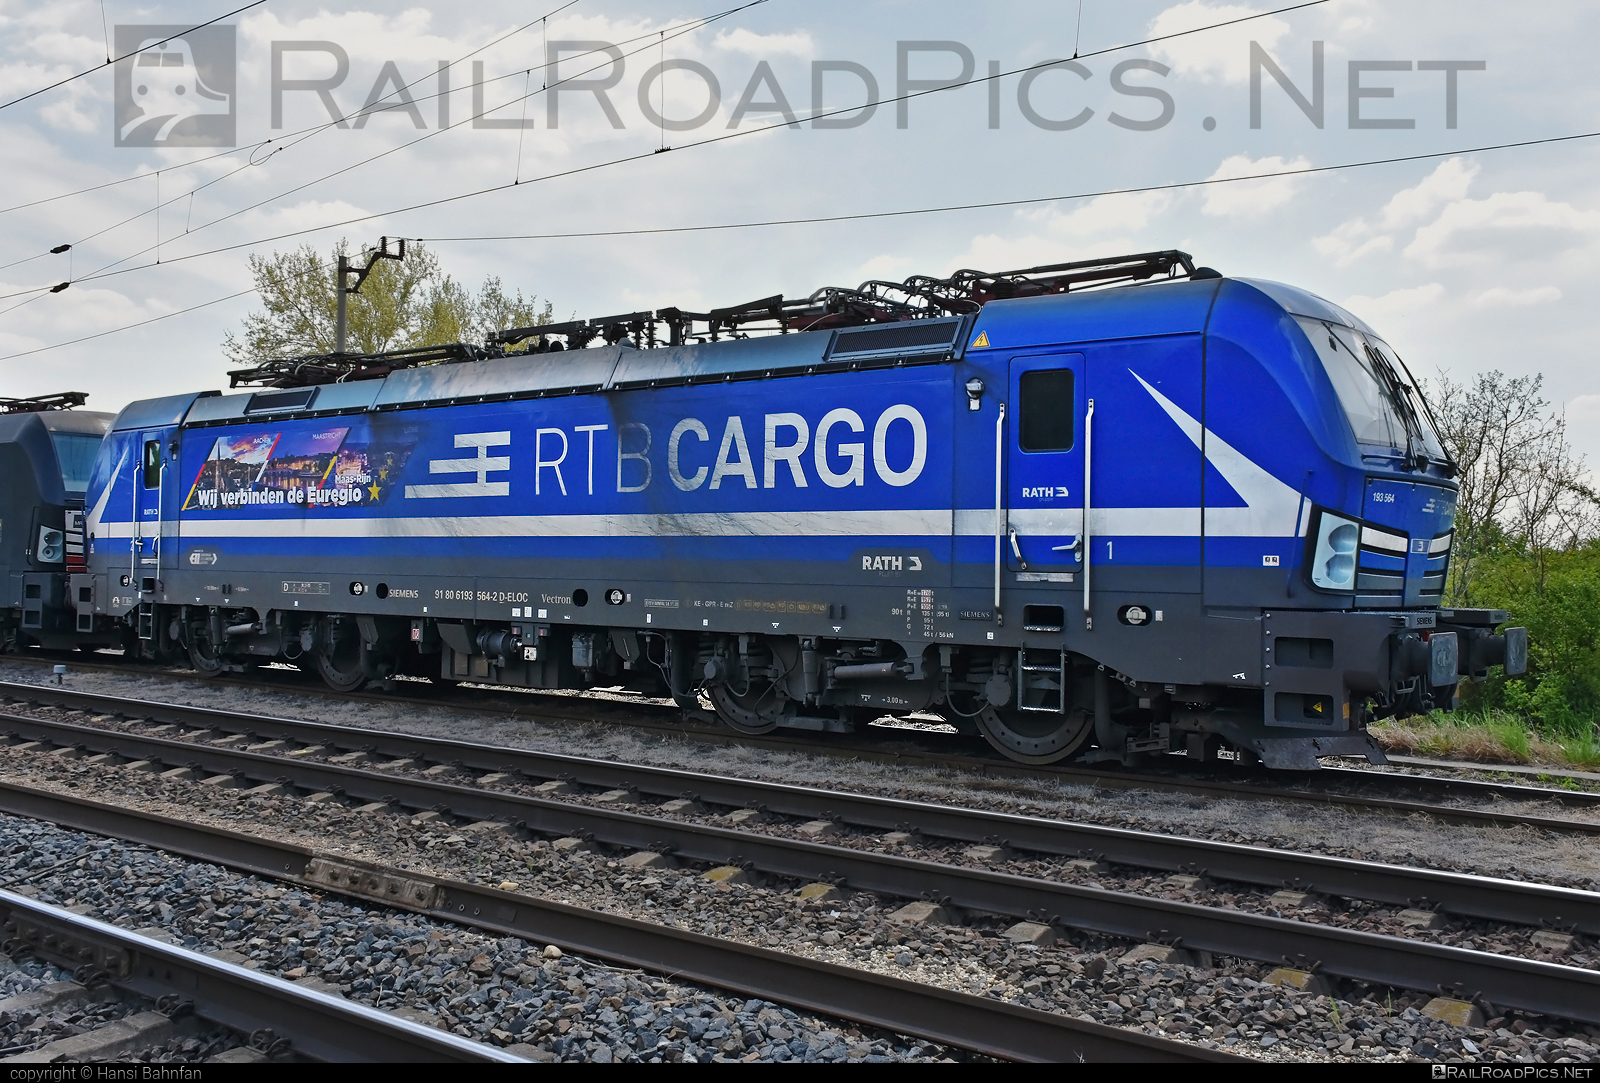 Siemens Vectron MS - 193 564 operated by RTB Cargo GmbH #ell #ellgermany #eloc #europeanlocomotiveleasing #rtb #rtbcargo #siemens #siemensVectron #siemensVectronMS #vectron #vectronMS